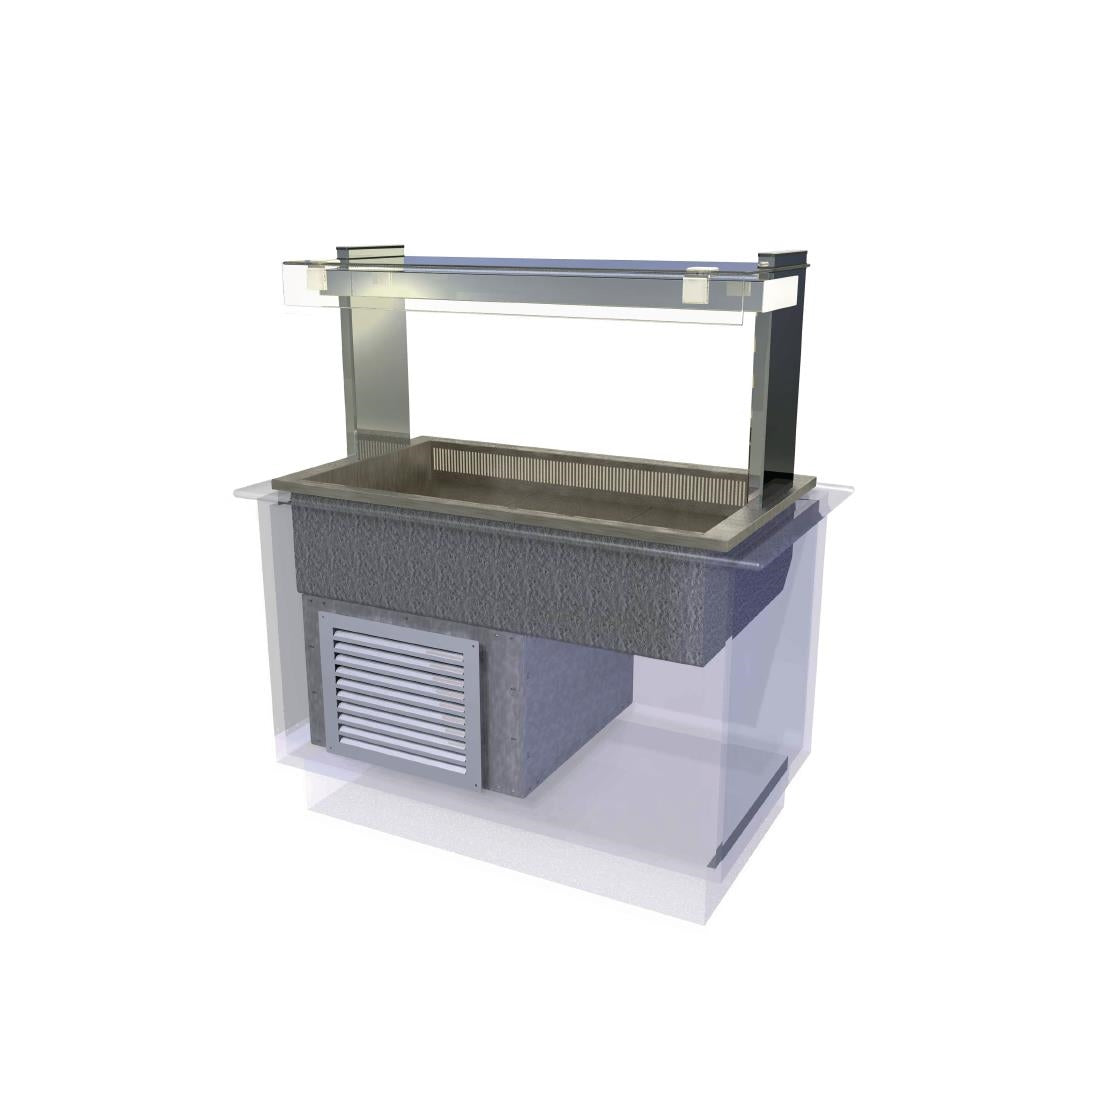 CW633 Kubus Drop In Cold Well Self Service 1525mm JD Catering Equipment Solutions Ltd